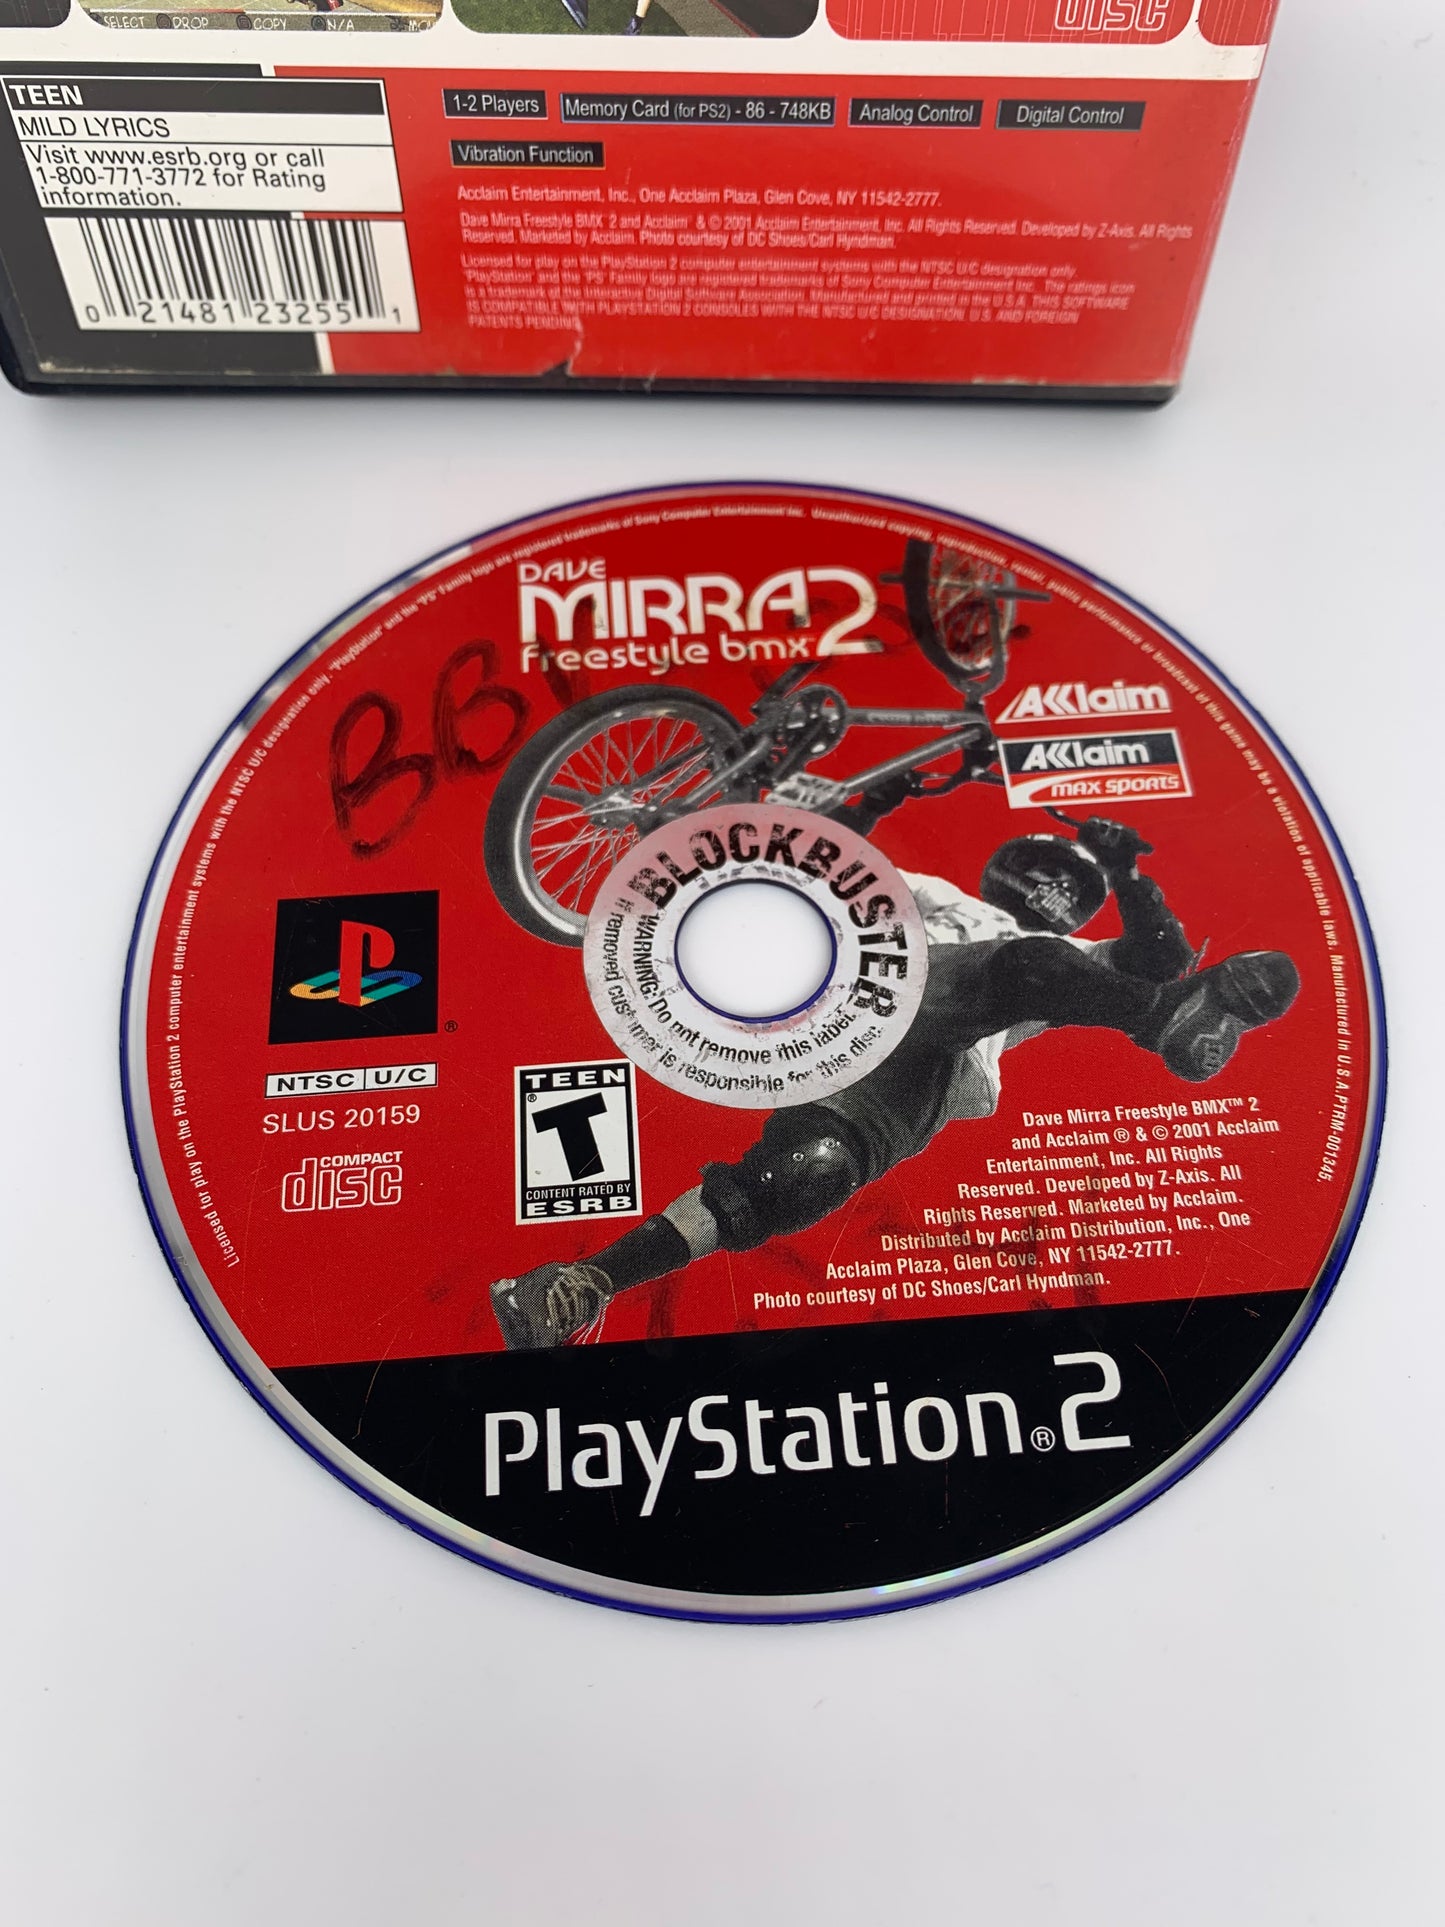 SONY PLAYSTATiON 2 [PS2] | DAVE MiRRA 2 FREESTYLE BMX